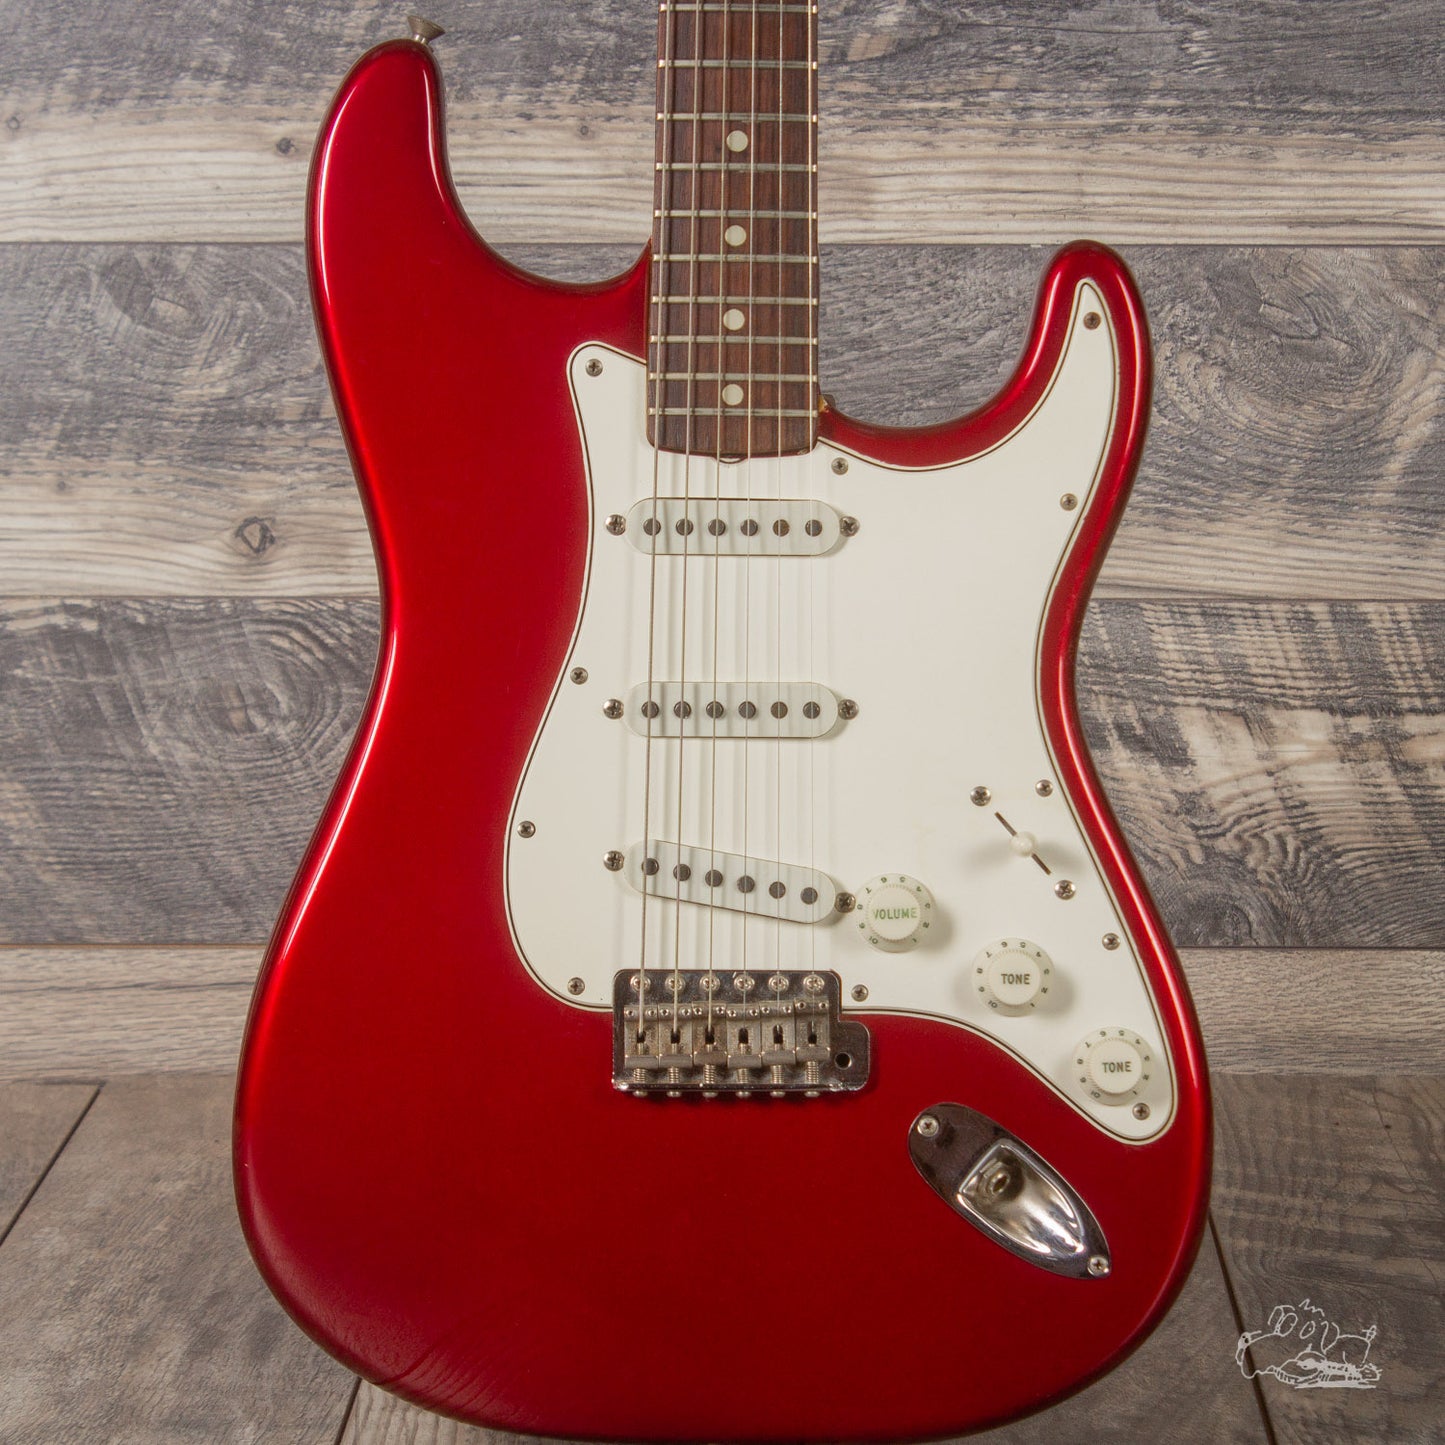 1966 Fender Stratocaster - Candy Apple Red